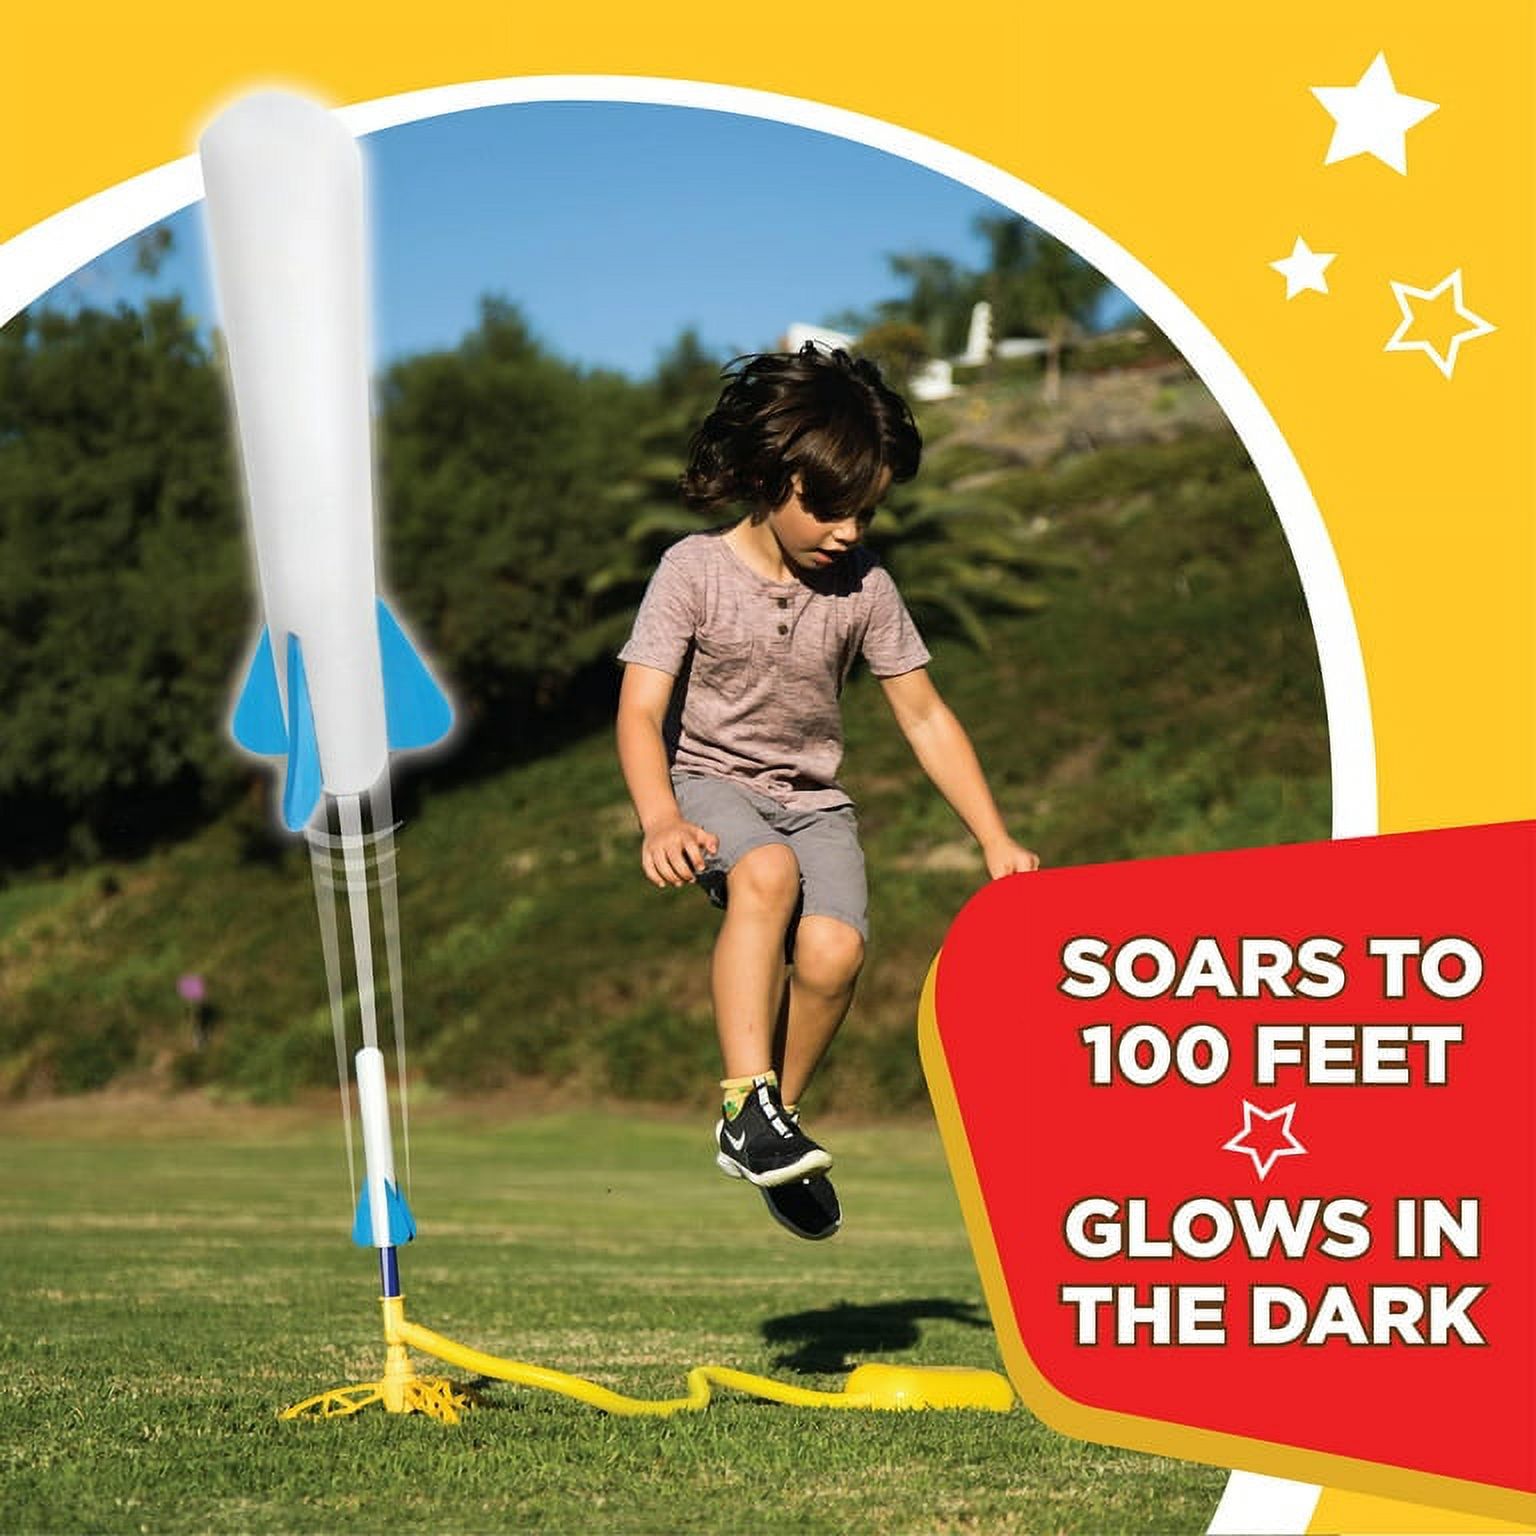 Stomp Rocket® Original Jr. Glow Rocket Launcher for Kids, Soars up to 100 Ft, 4 Foam Rockets and Adjustable Launcher, Gift for Boys and Girls Ages 3 Years and up - image 4 of 8